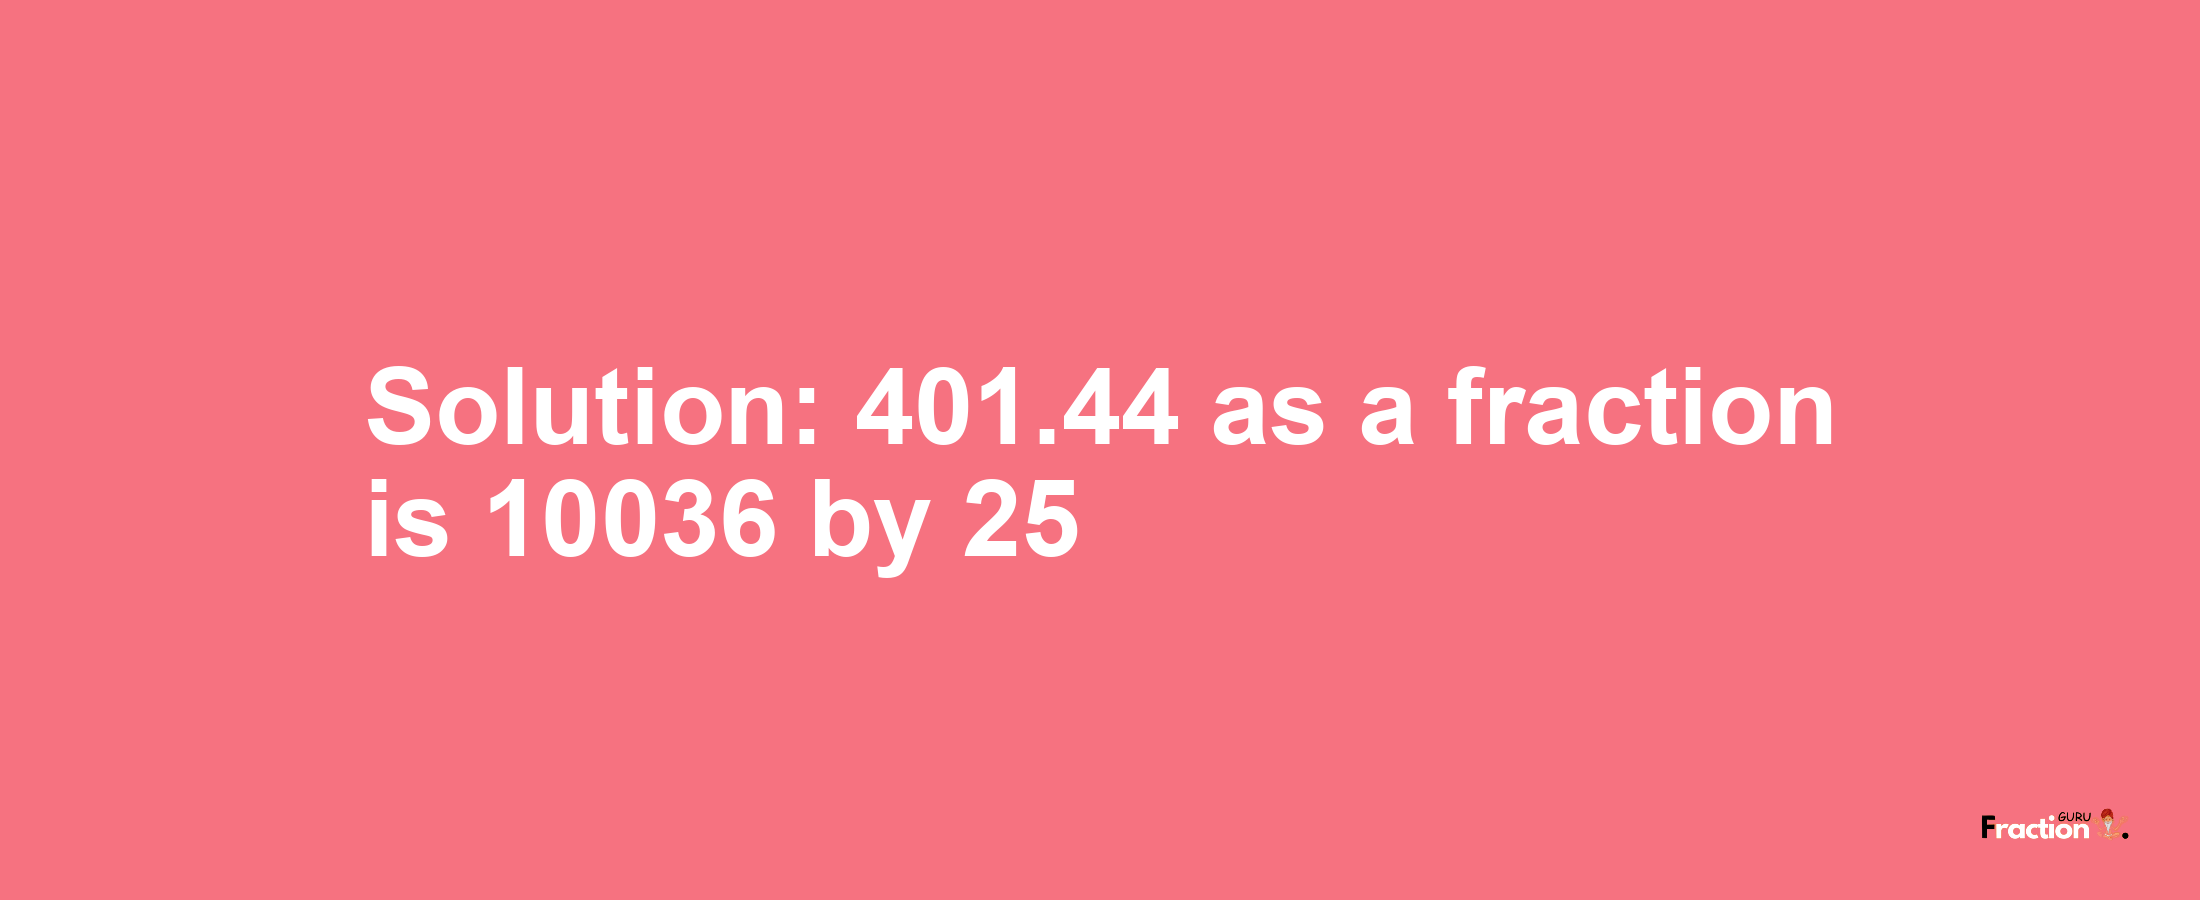 Solution:401.44 as a fraction is 10036/25